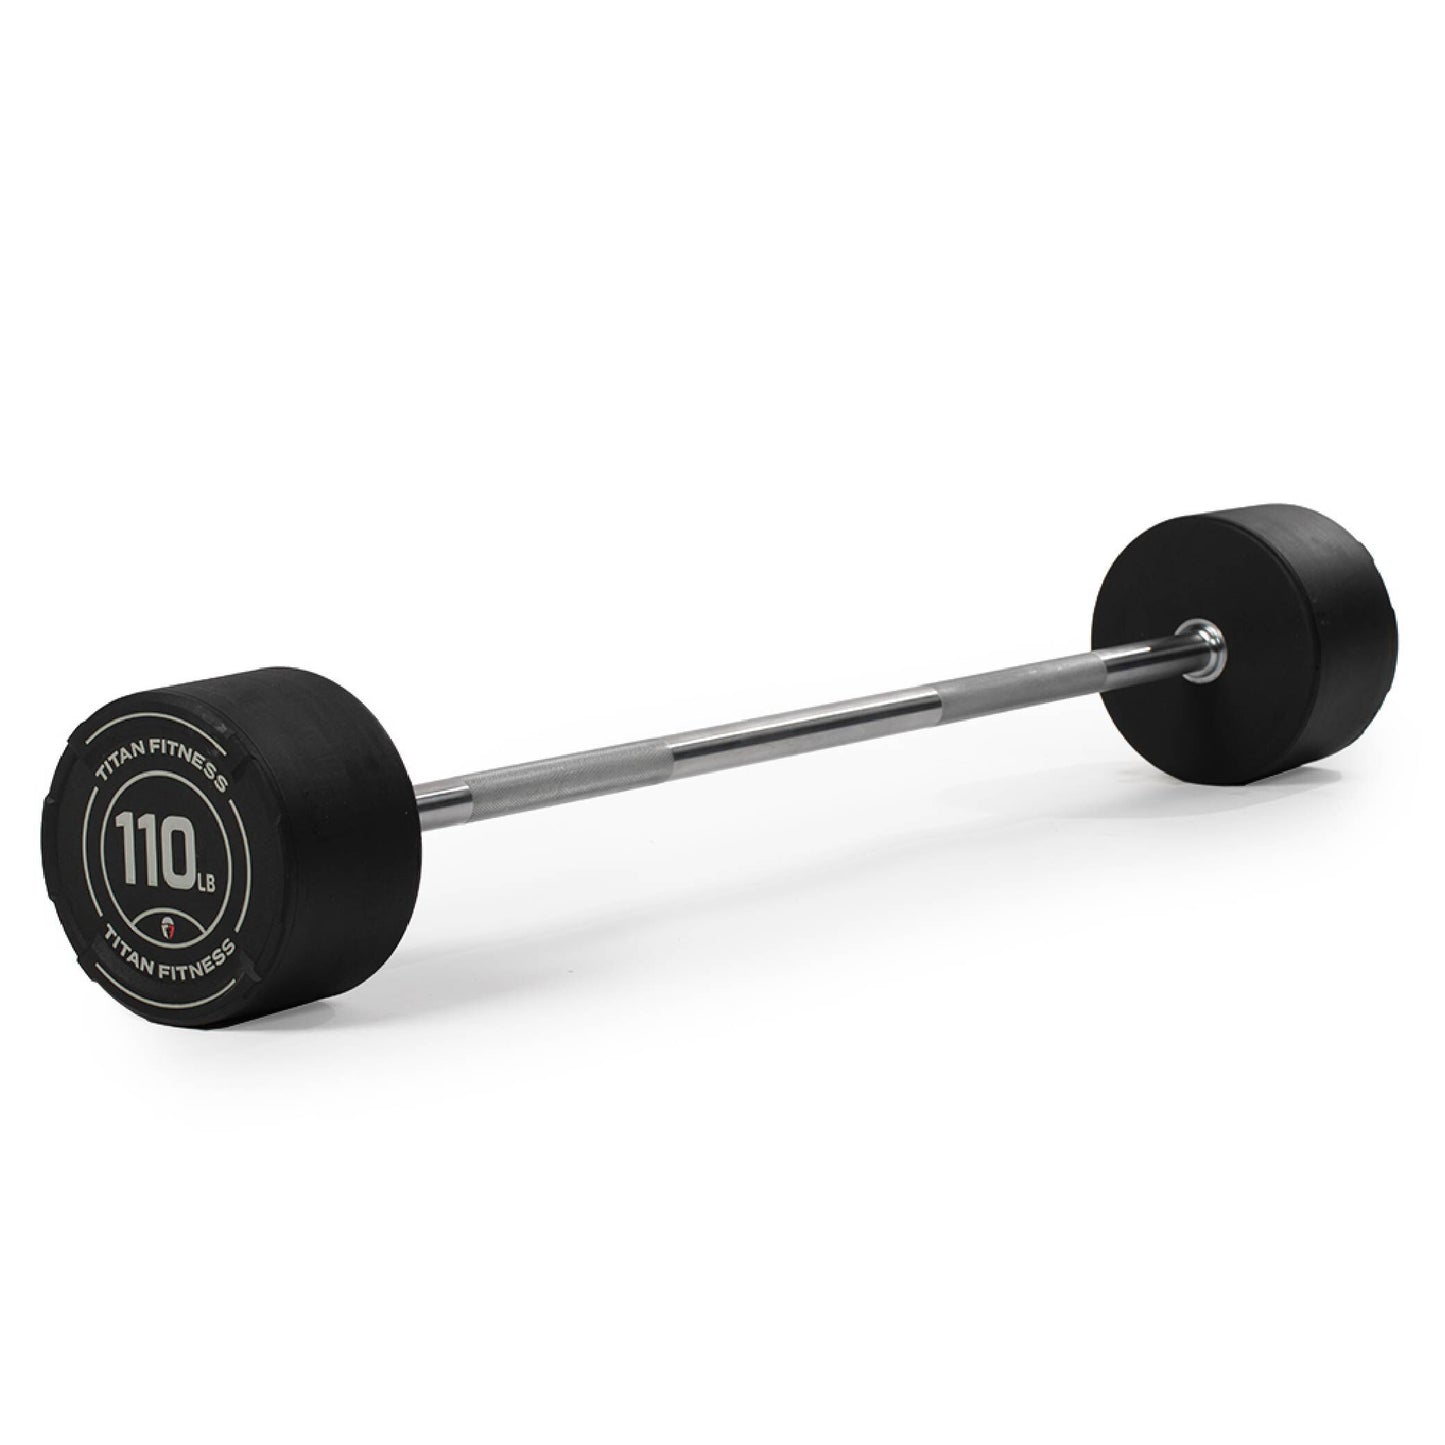 110 LB Straight Fixed Rubber Barbell - view 1